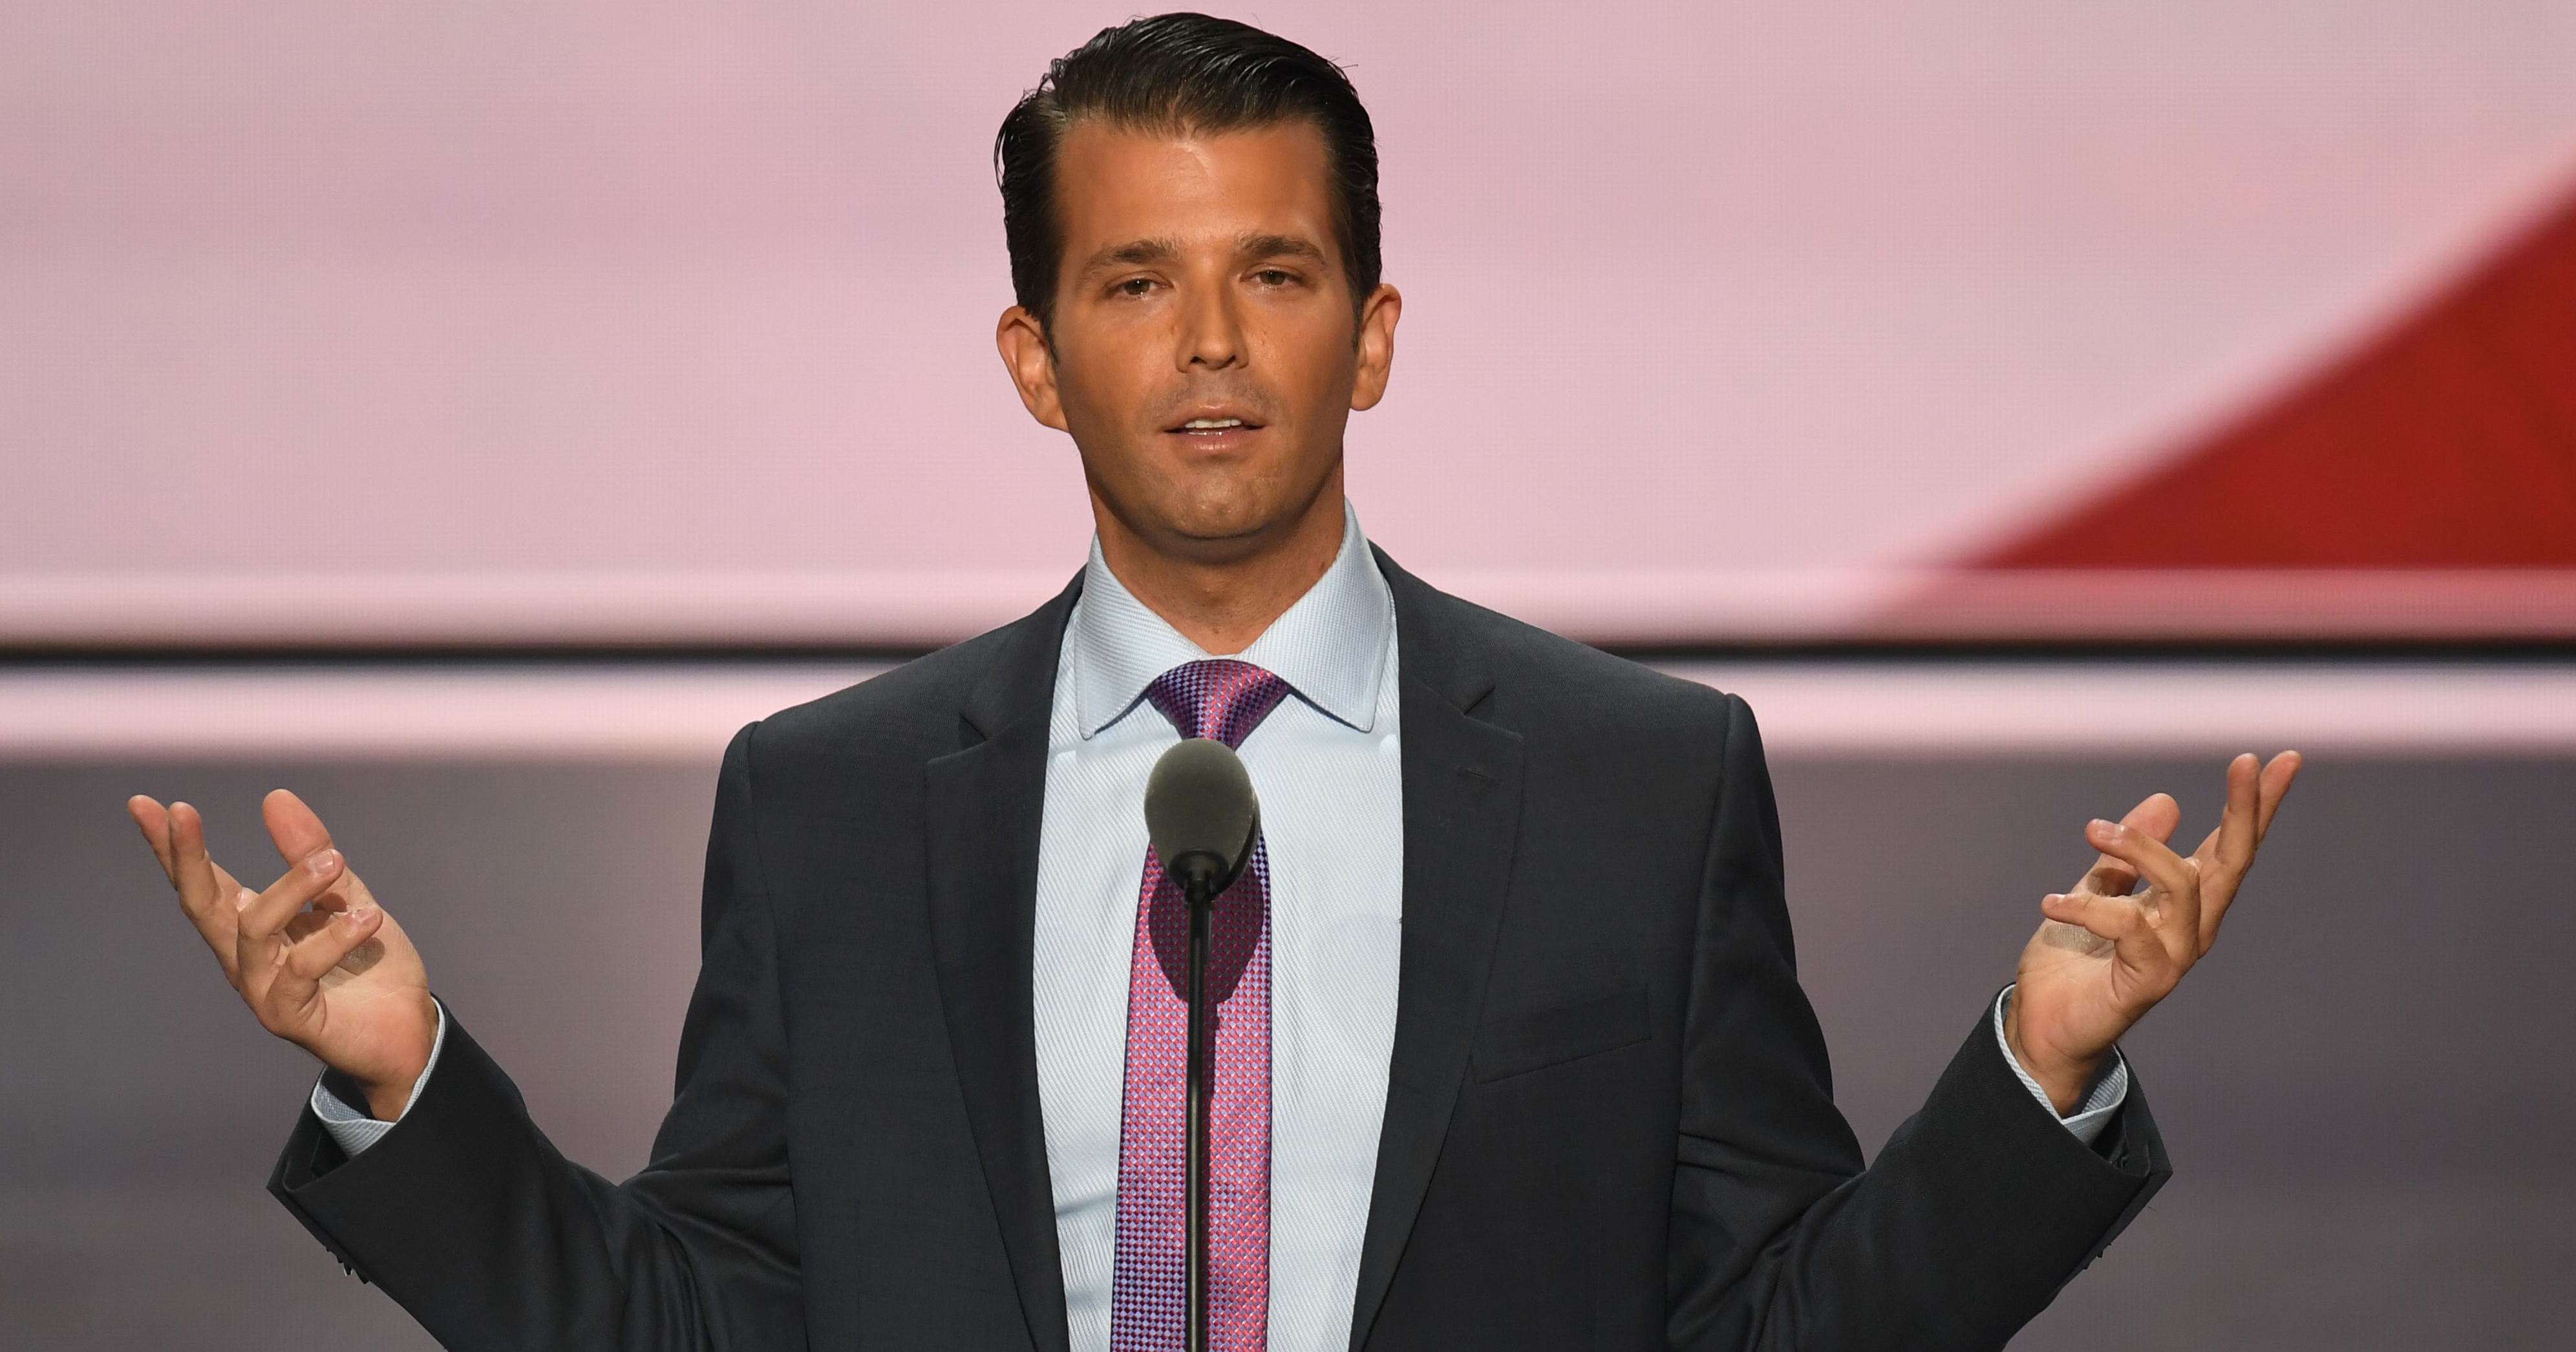 Donald Trump, Jr. in Cleveland, on July 19, 2016. (Jim Watson—AFP/Getty Images)